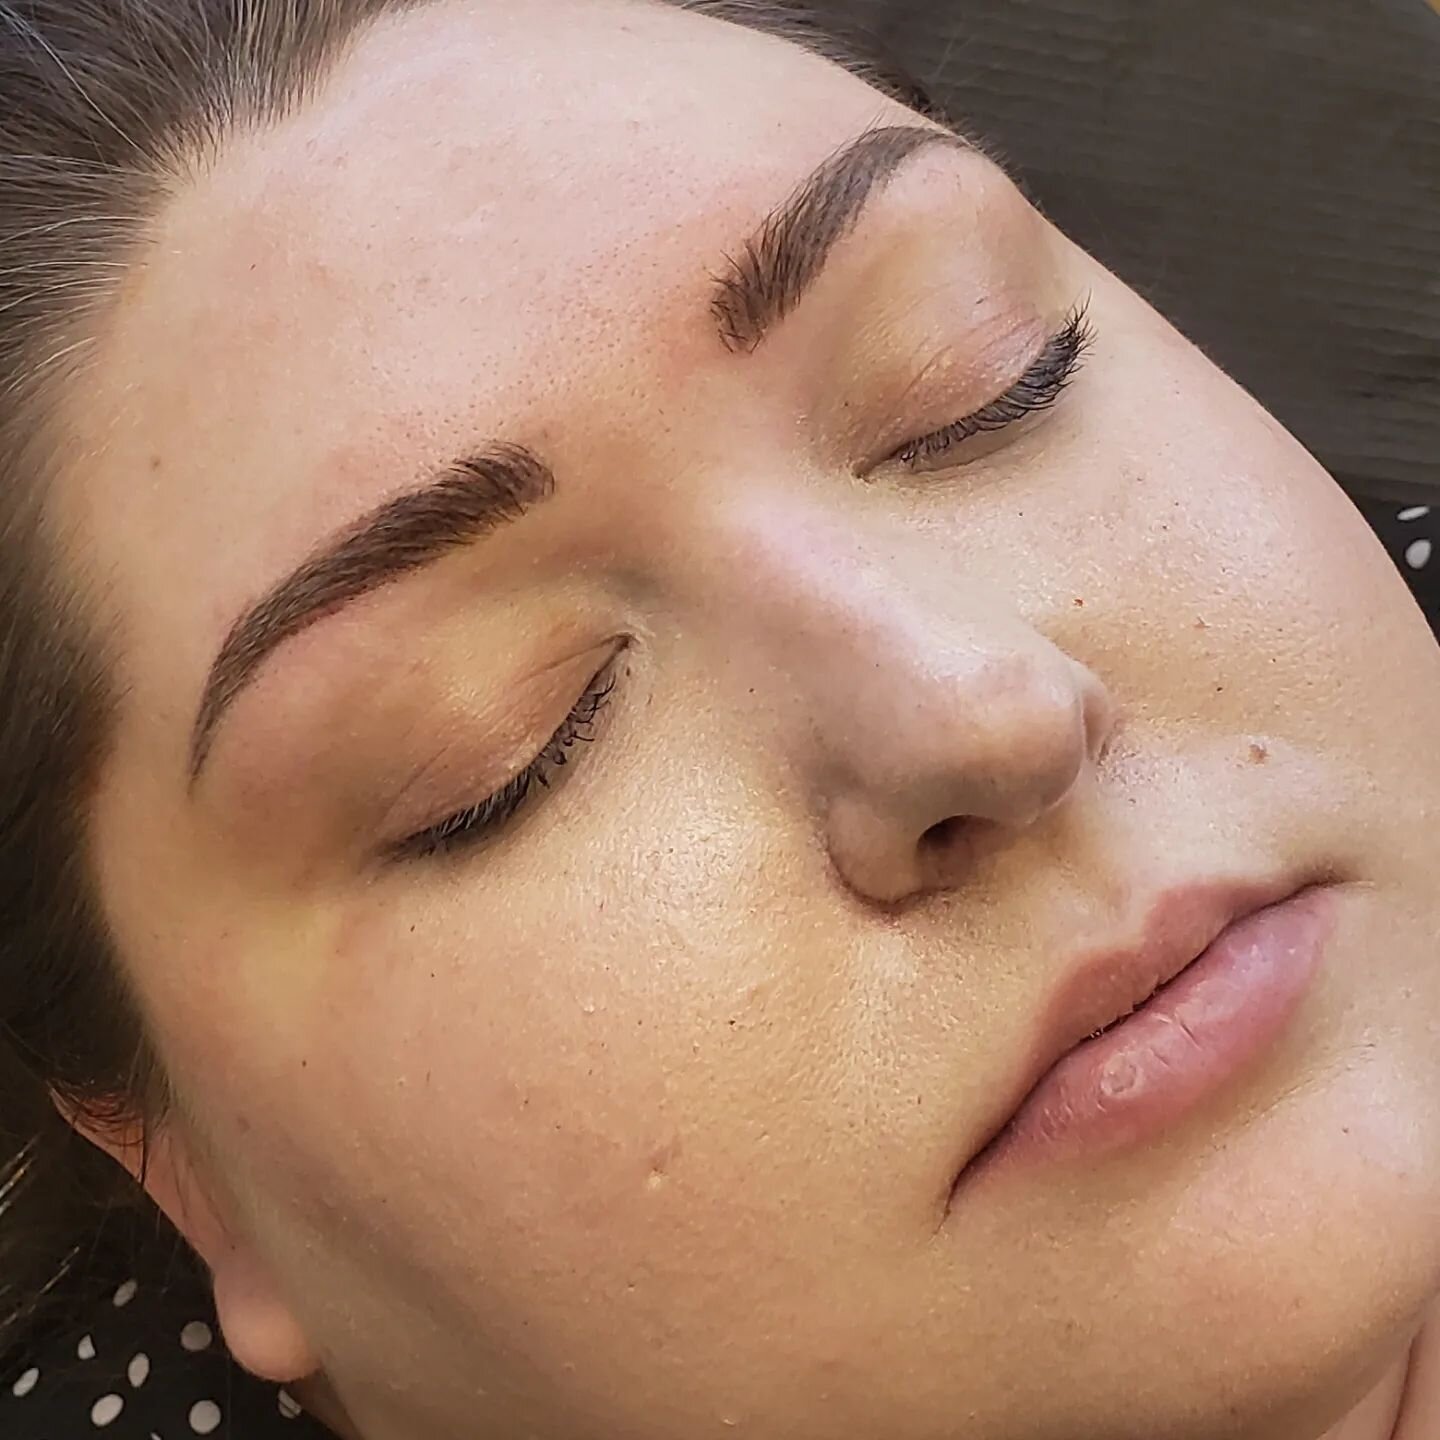 A cover up of old microblading! She had let them fade enough that we were able to do a combo brow with hairstrokes instead of a powder brow style correction.👍

Ideally we want the old pigment faded 50% or, if it easier to imagine,  being able see yo